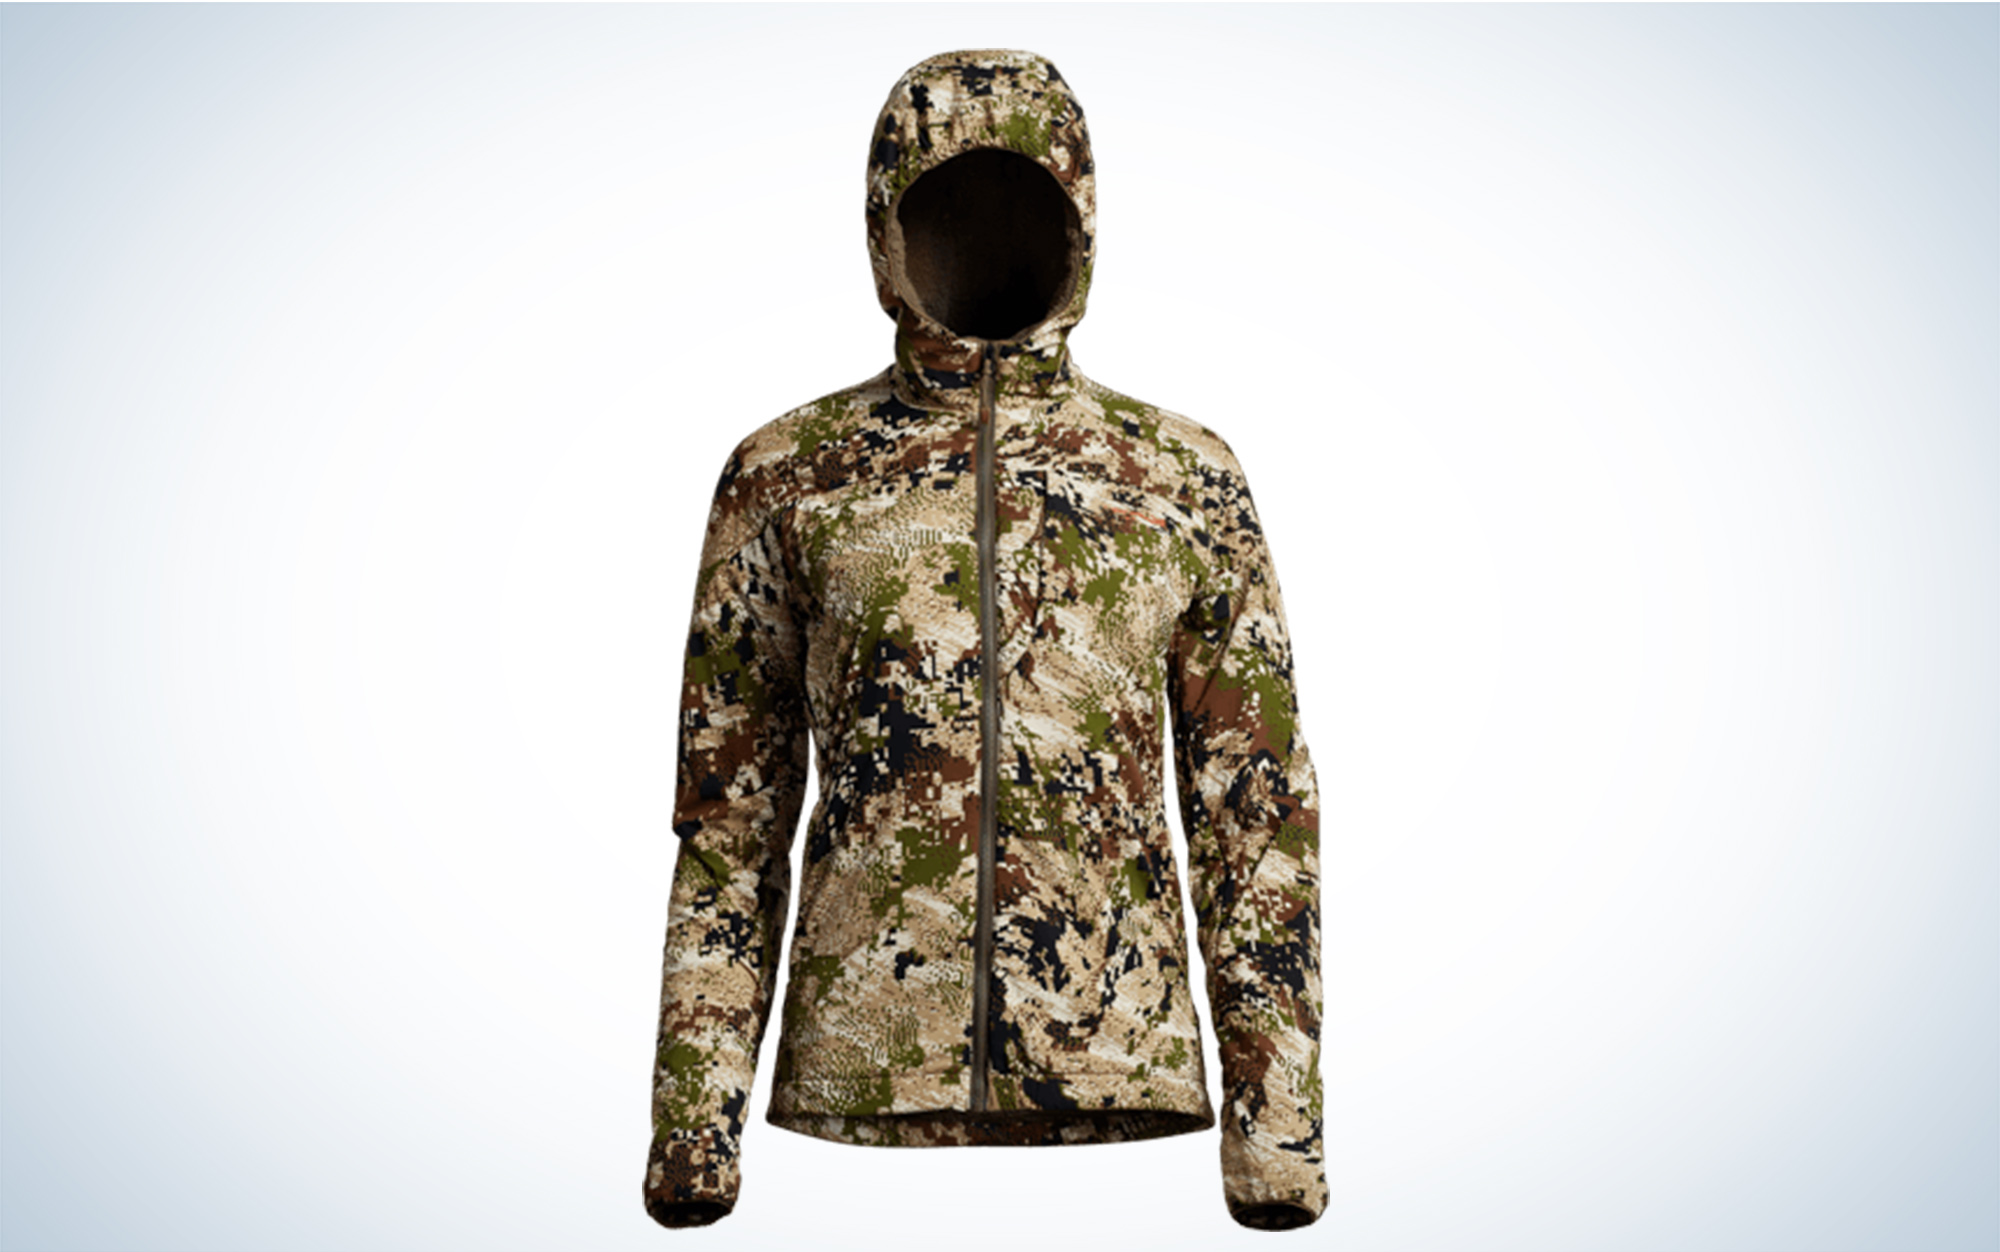 The Sitka Women’s Ambient Jacket is a great mid layer.